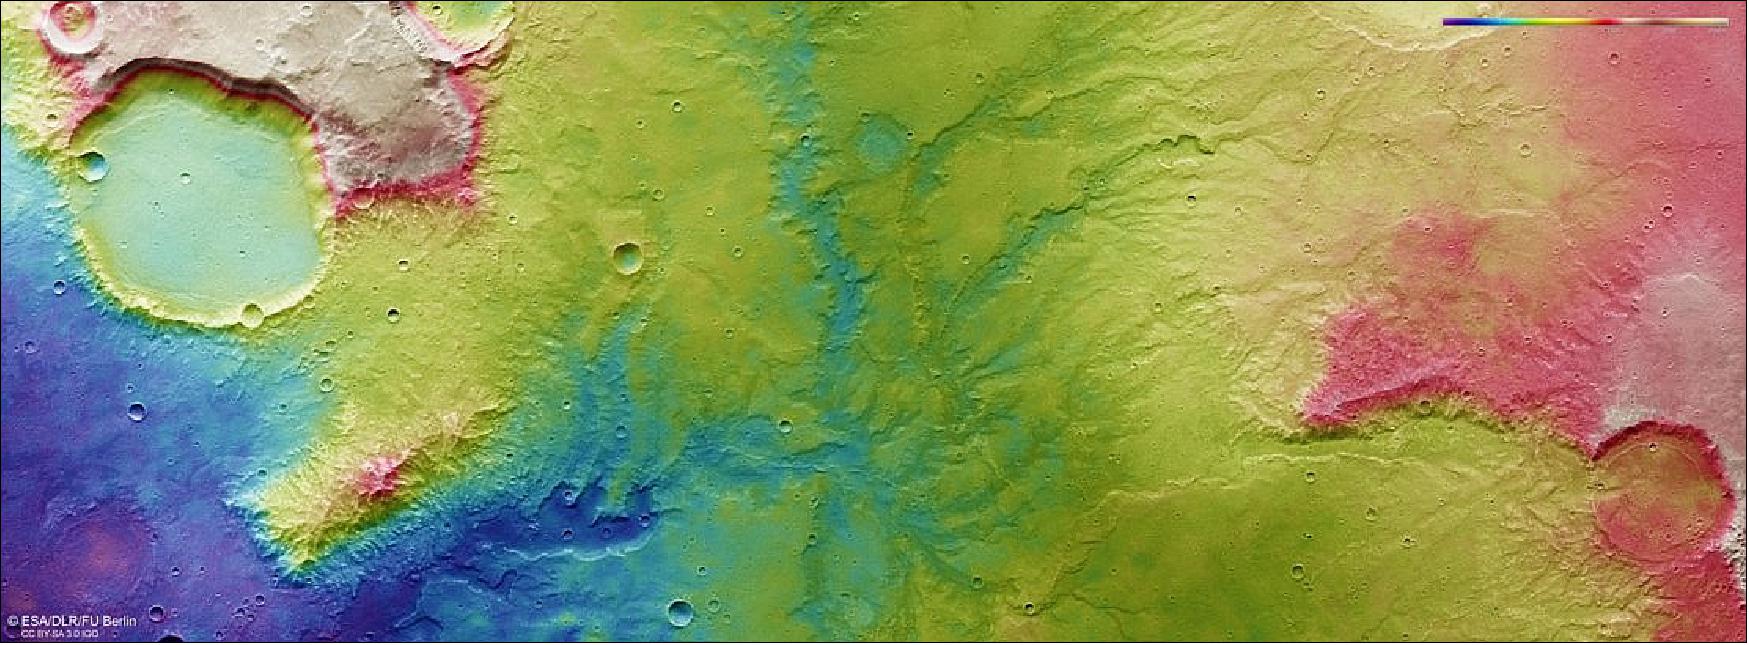 Figure 56: This color-coded topographic view shows the relative heights of the terrain in and around a network of dried-up valleys on Mars. Lower parts of the surface are shown in blues and purples, while higher altitude regions show up in whites, yellows, and reds, as indicated on the scale to the top right. This view is based on a digital terrain model of the region, from which the topography of the landscape can be derived. It comprises data obtained by the High Resolution Stereo Camera on Mars Express on 19 November 2018 during Mars Express orbit 18831. The ground resolution is approximately 14 m/pixel and the images are centered at 66°E/17°S. North is to the right (image credit: ESA/DLR/FU Berlin, CC BY-SA 3.0 IGO)